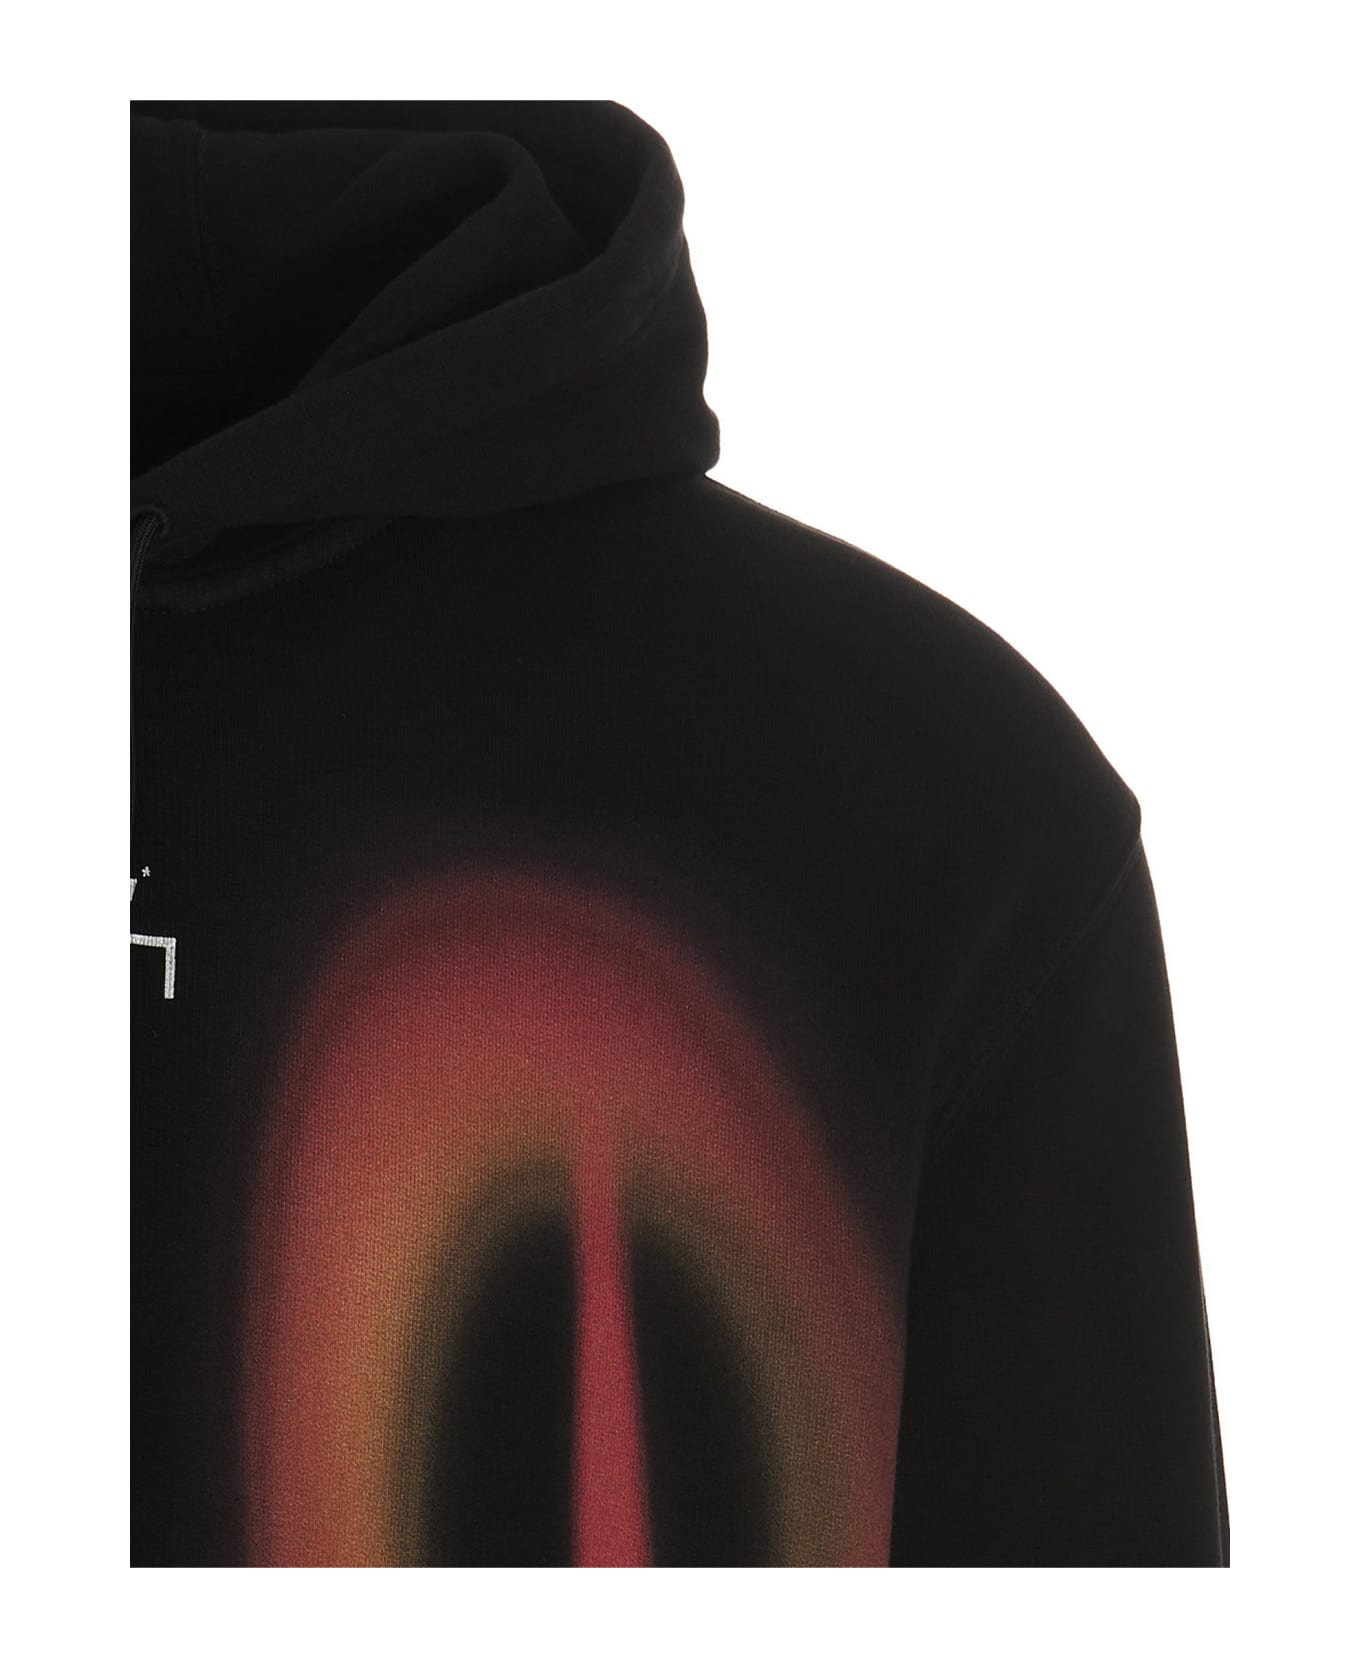 A-COLD-WALL 'hypergraphic' Hoodie - Black  